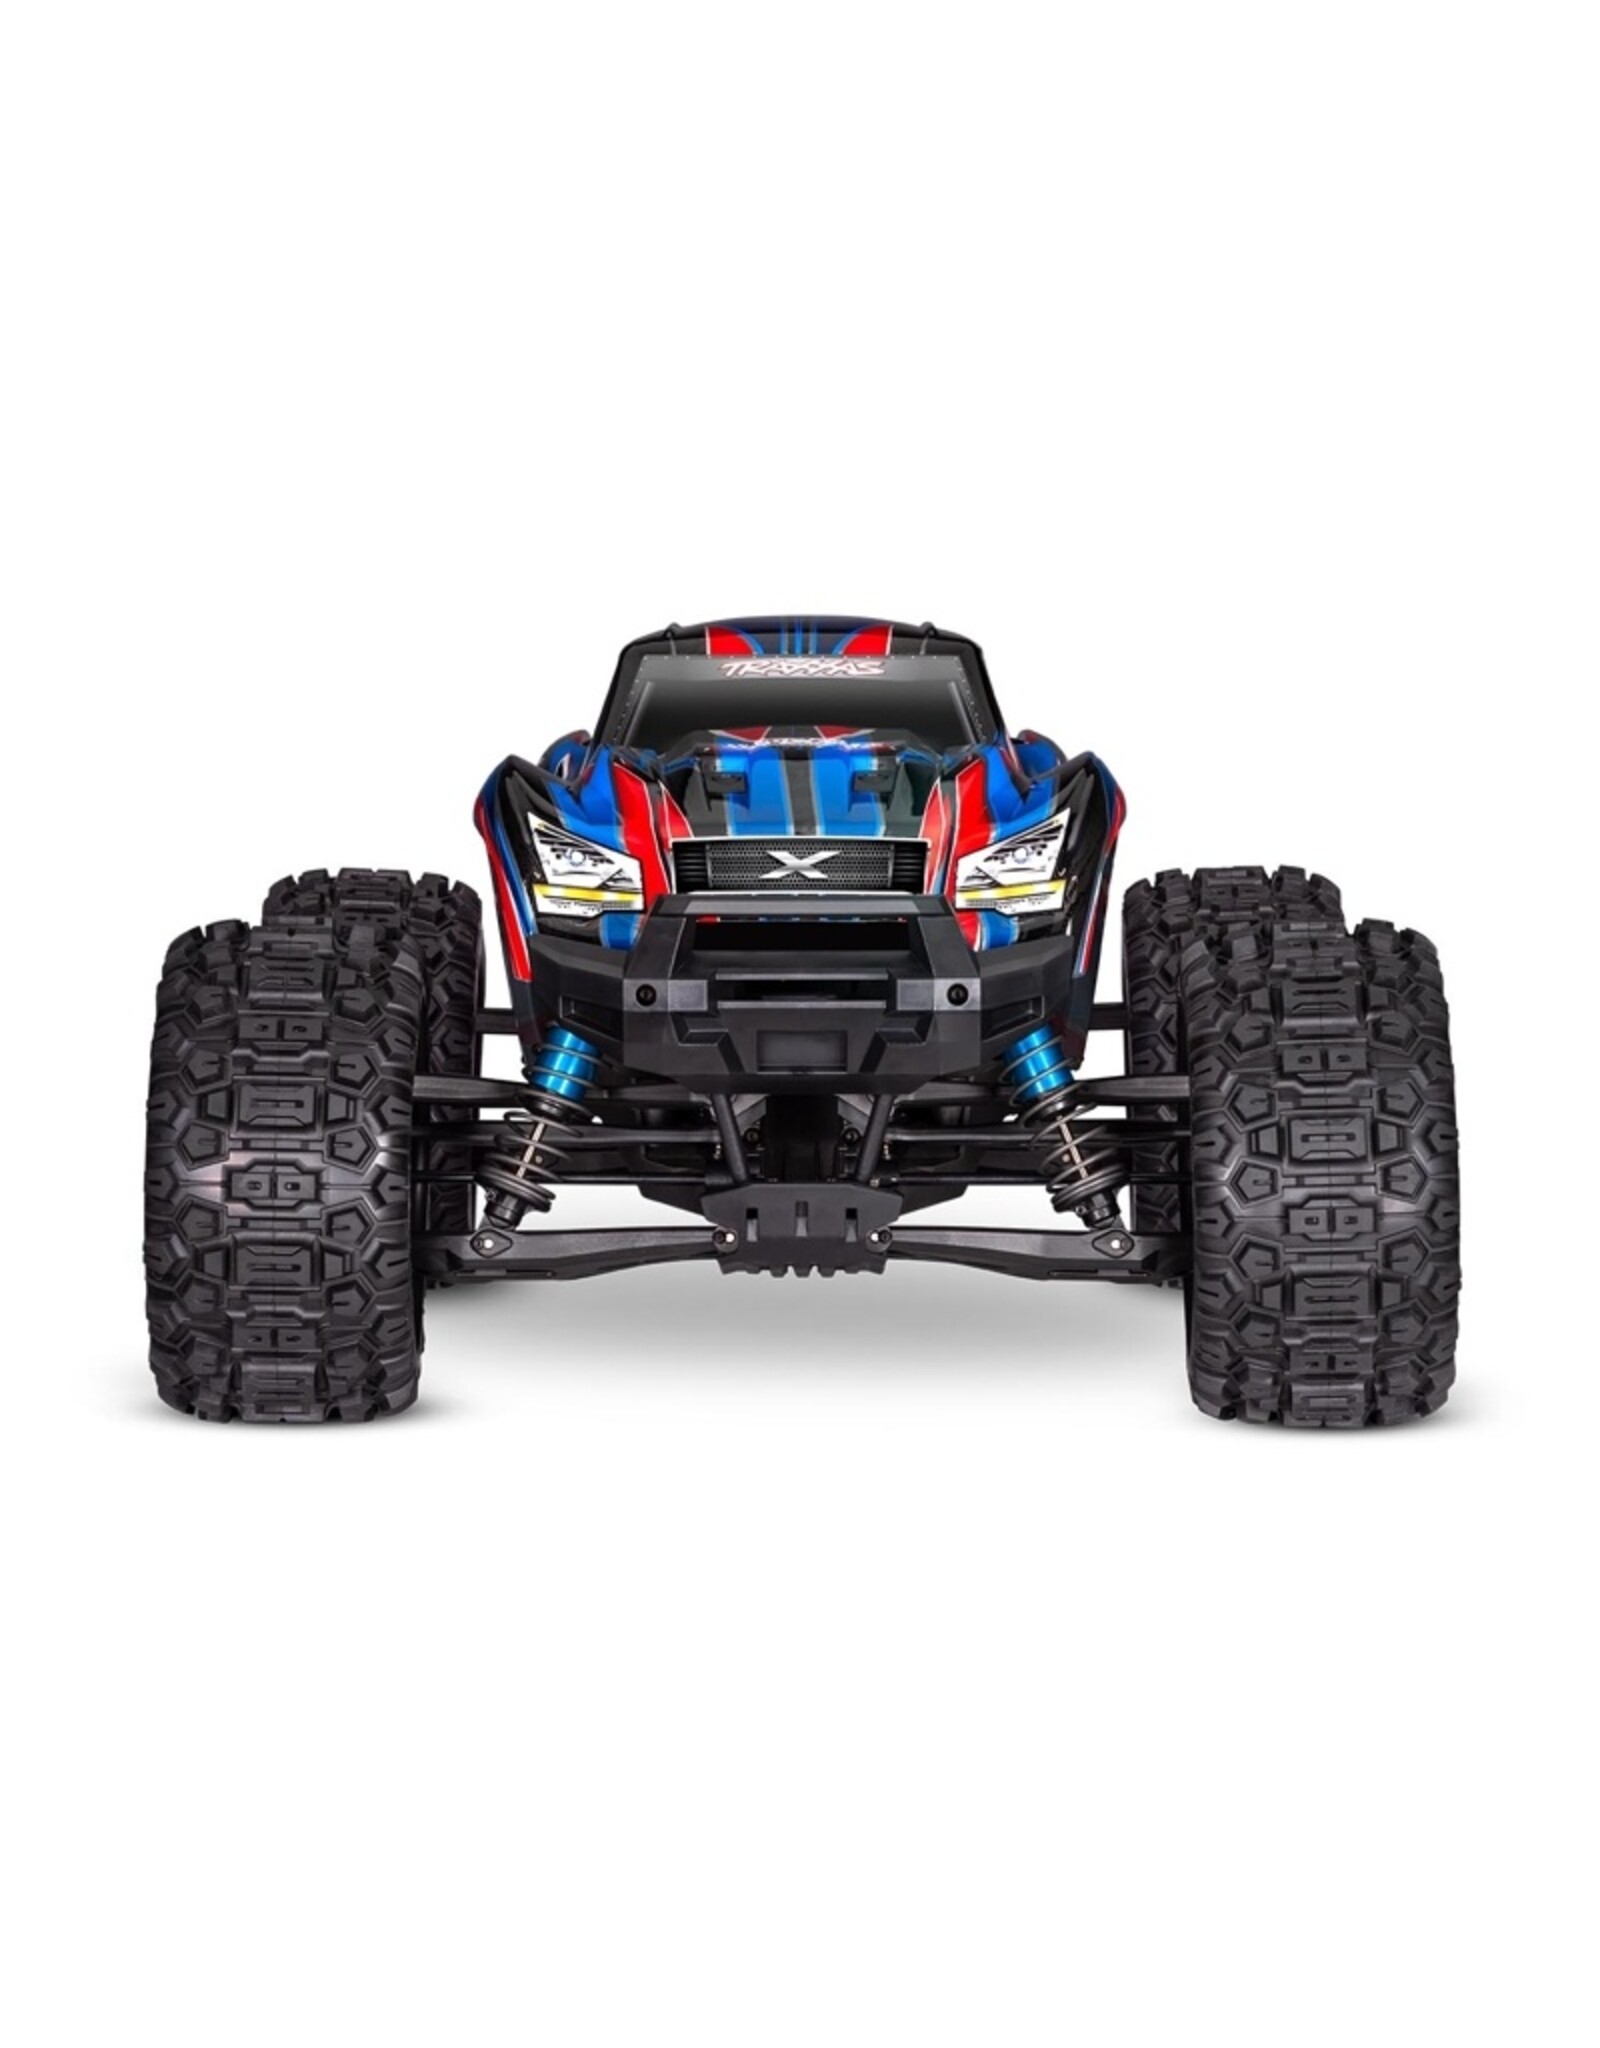 Traxxas TRA77096-4 X-Maxx 8s Belted BLUE